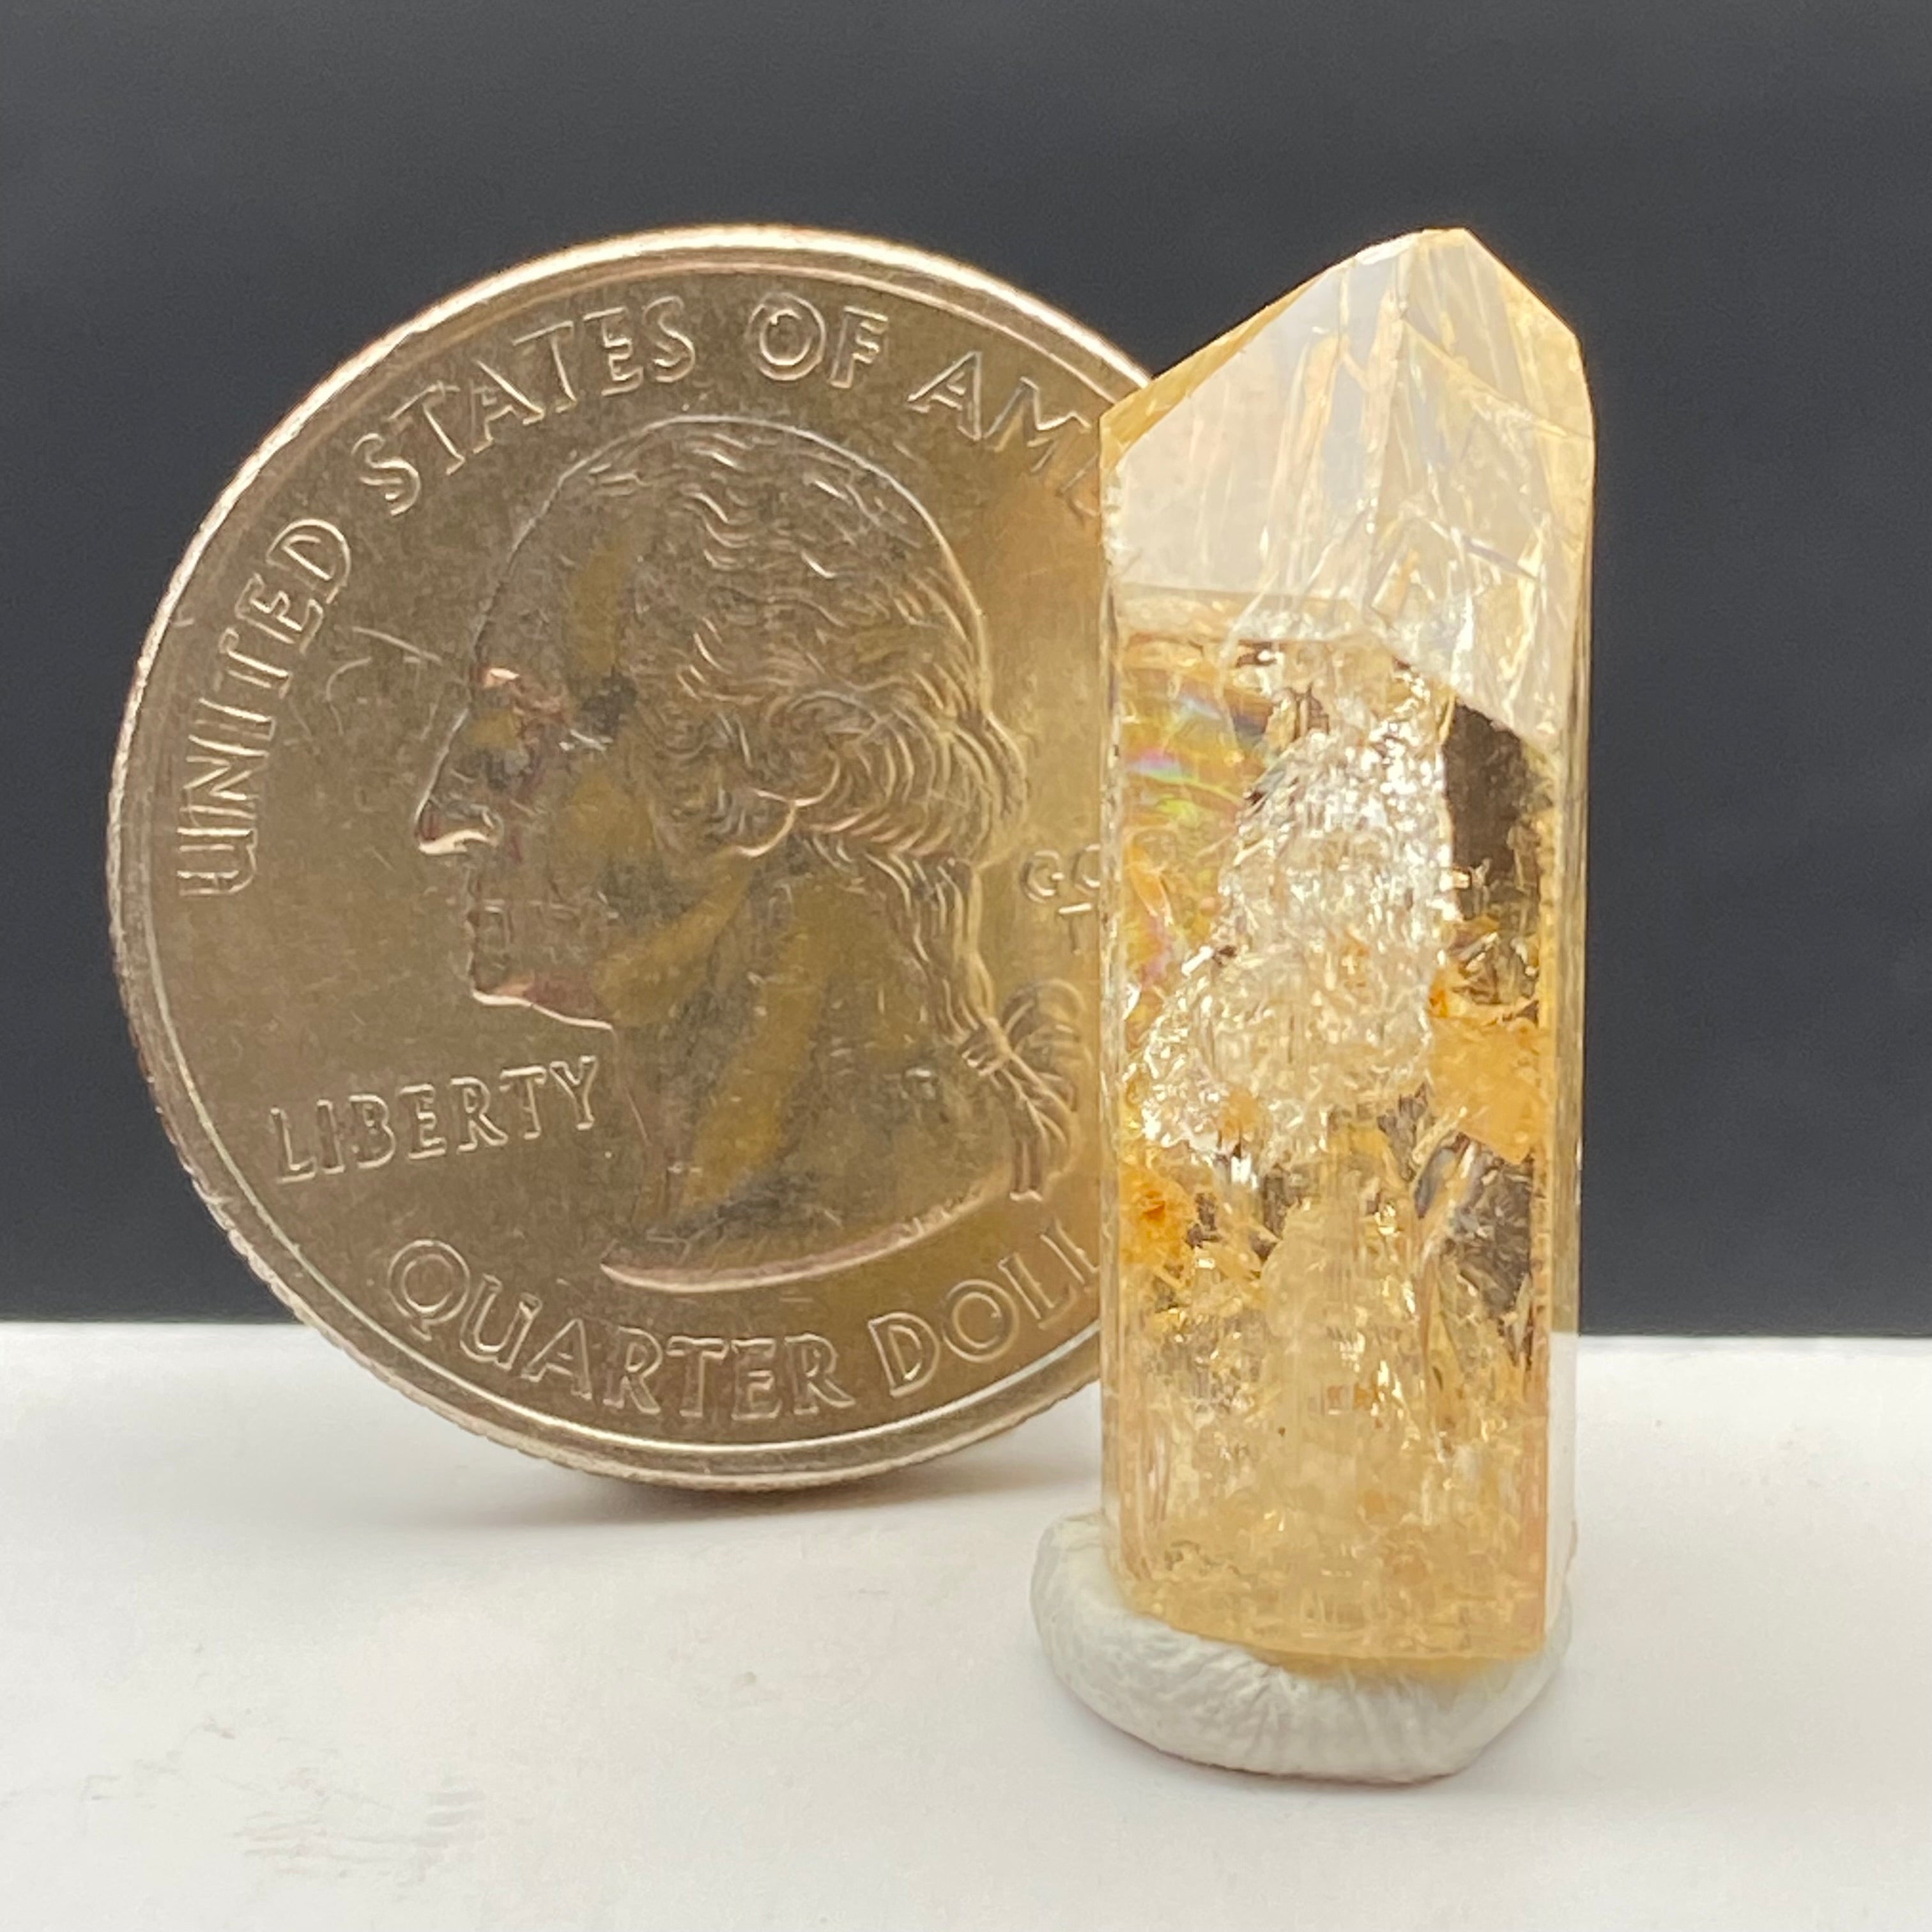 Imperial Topaz Natural Full Terminated Crystal - 102